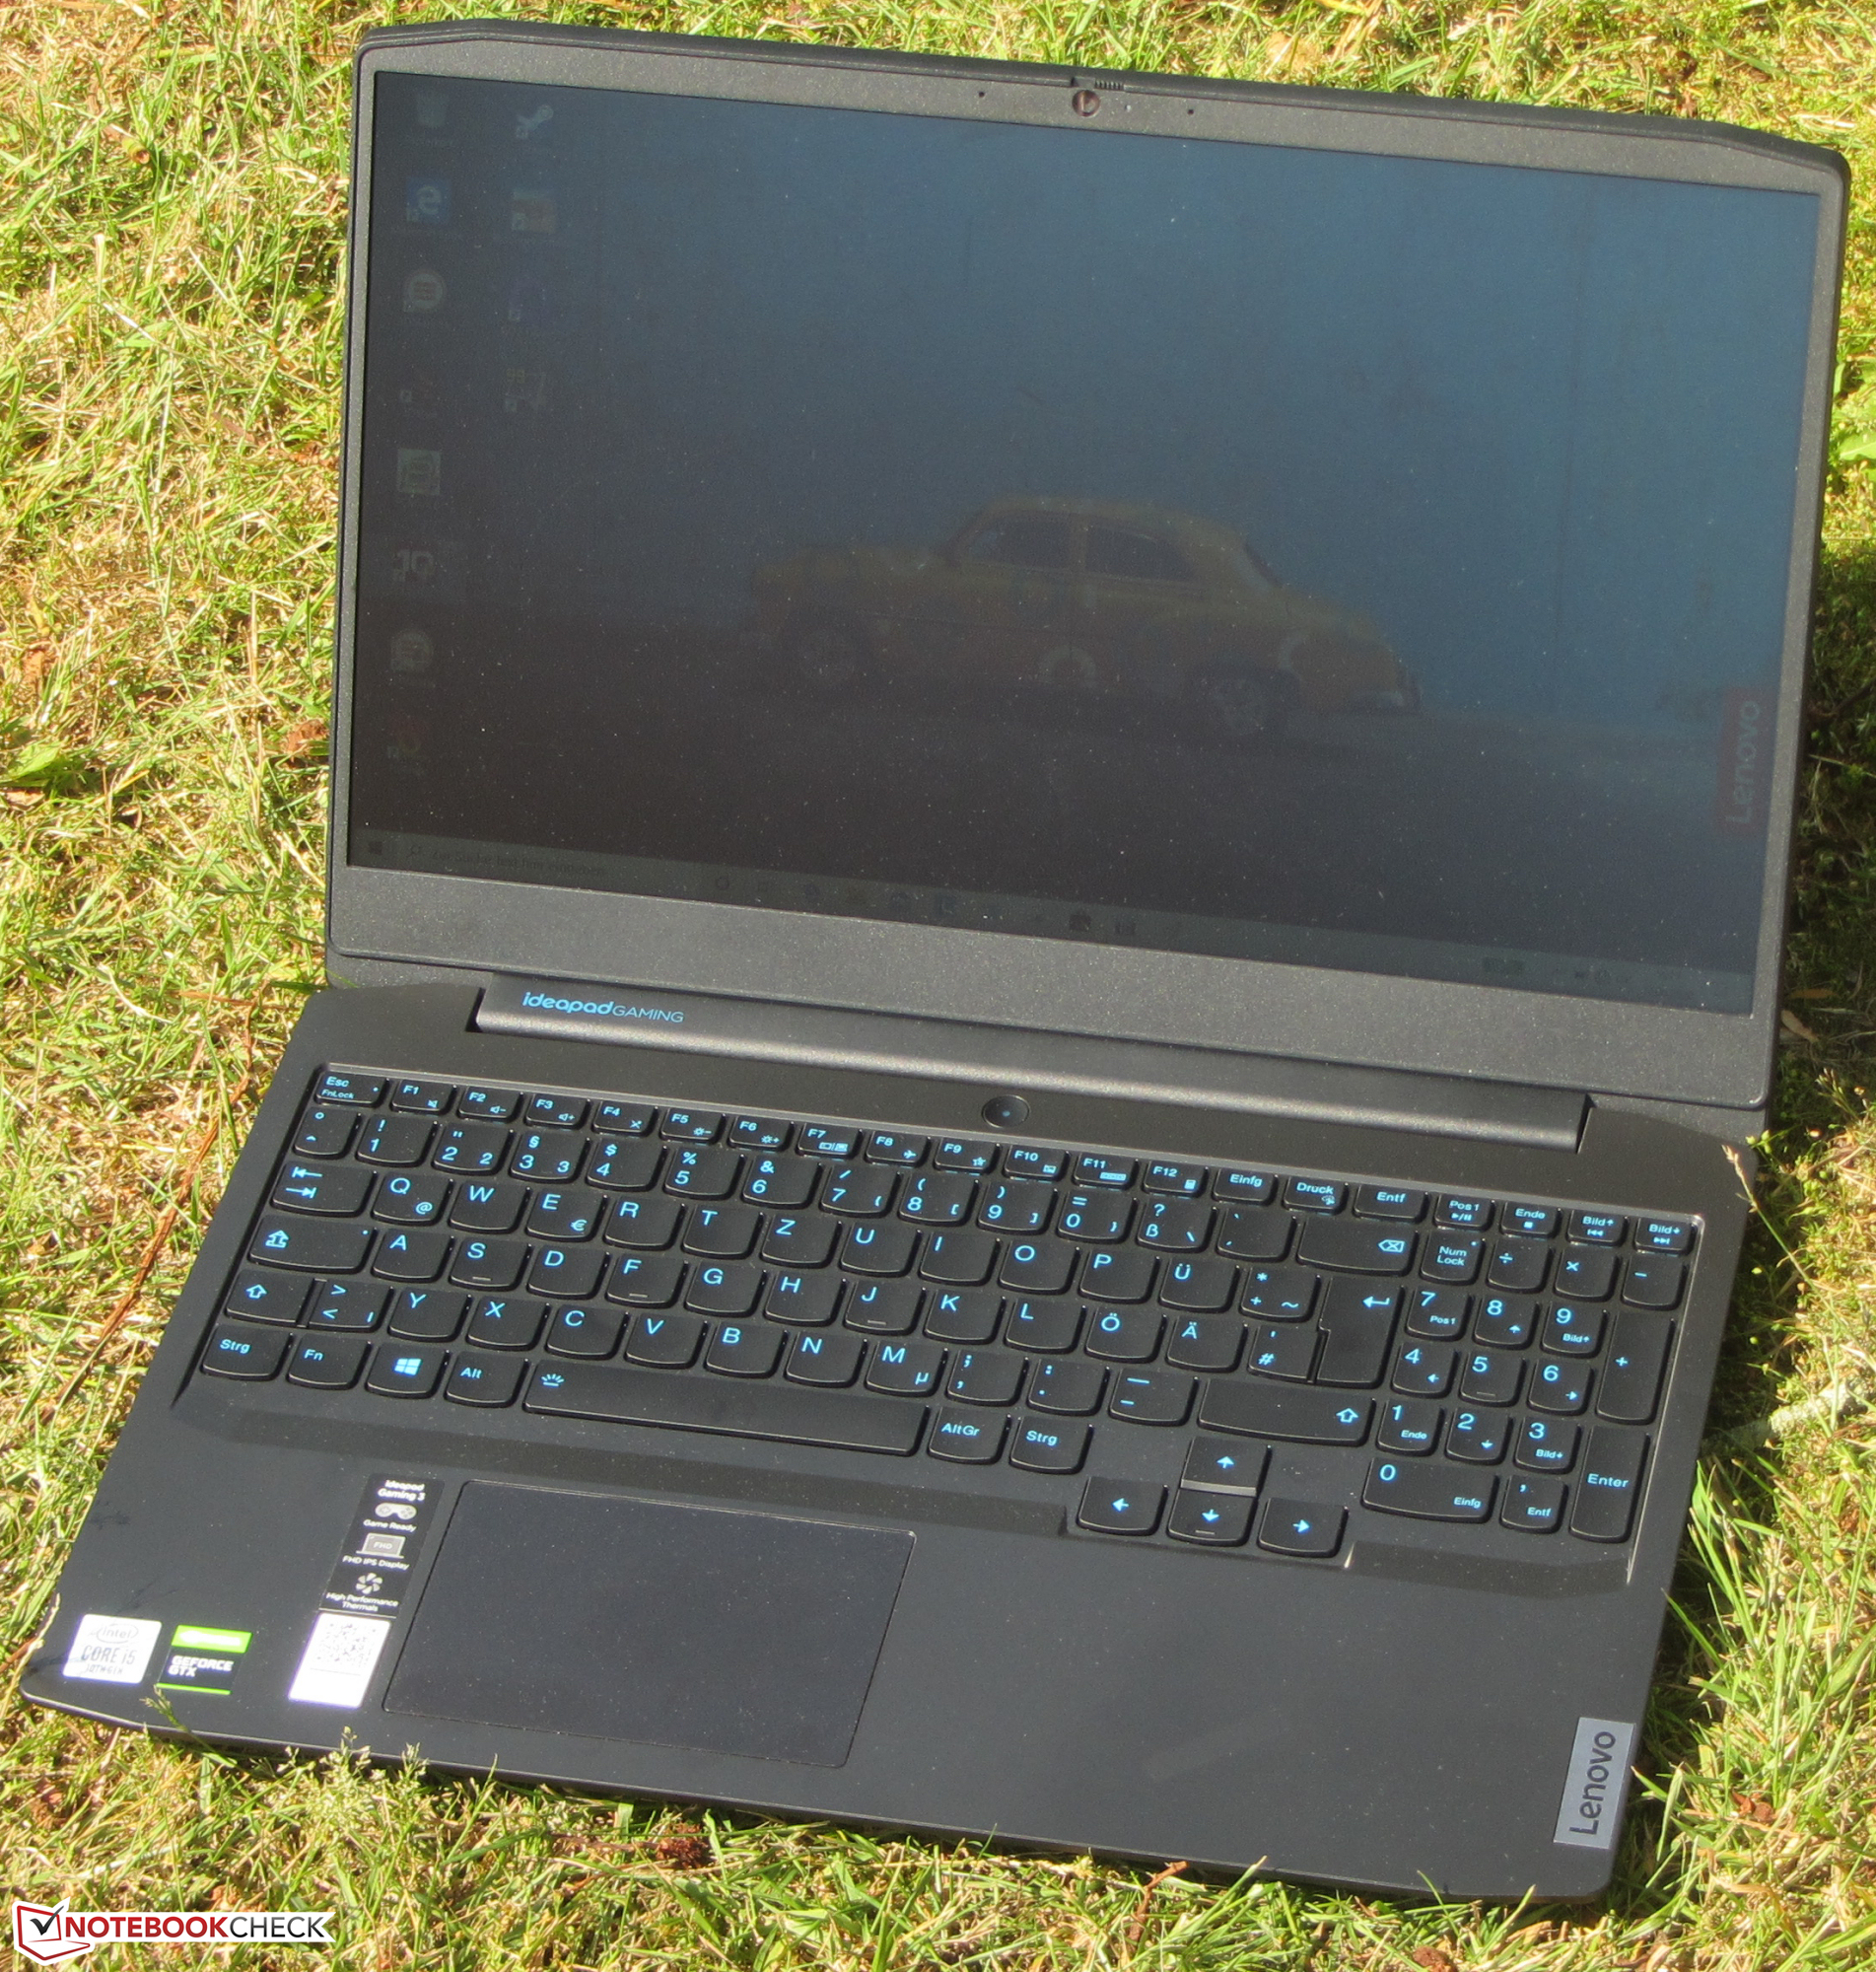 Lenovo IdeaPad Gaming 3i 15IMH05 in review: Core i5 at full throttle